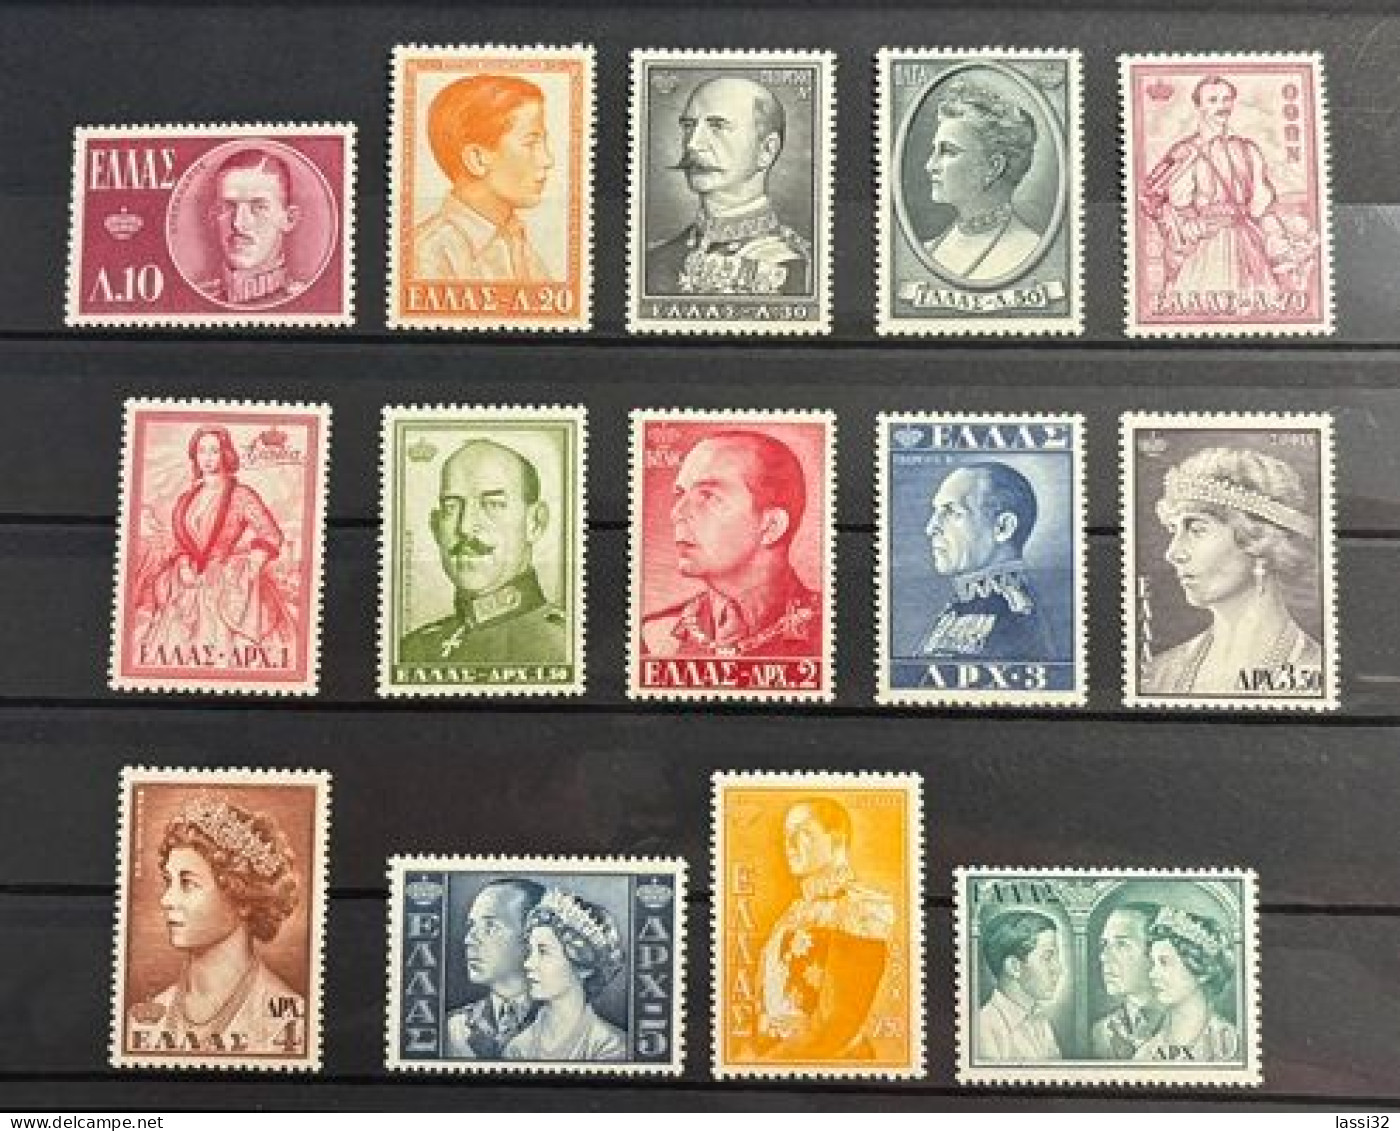 GREECE, 1957 Royal Familles, Part II, MNH - Unused Stamps